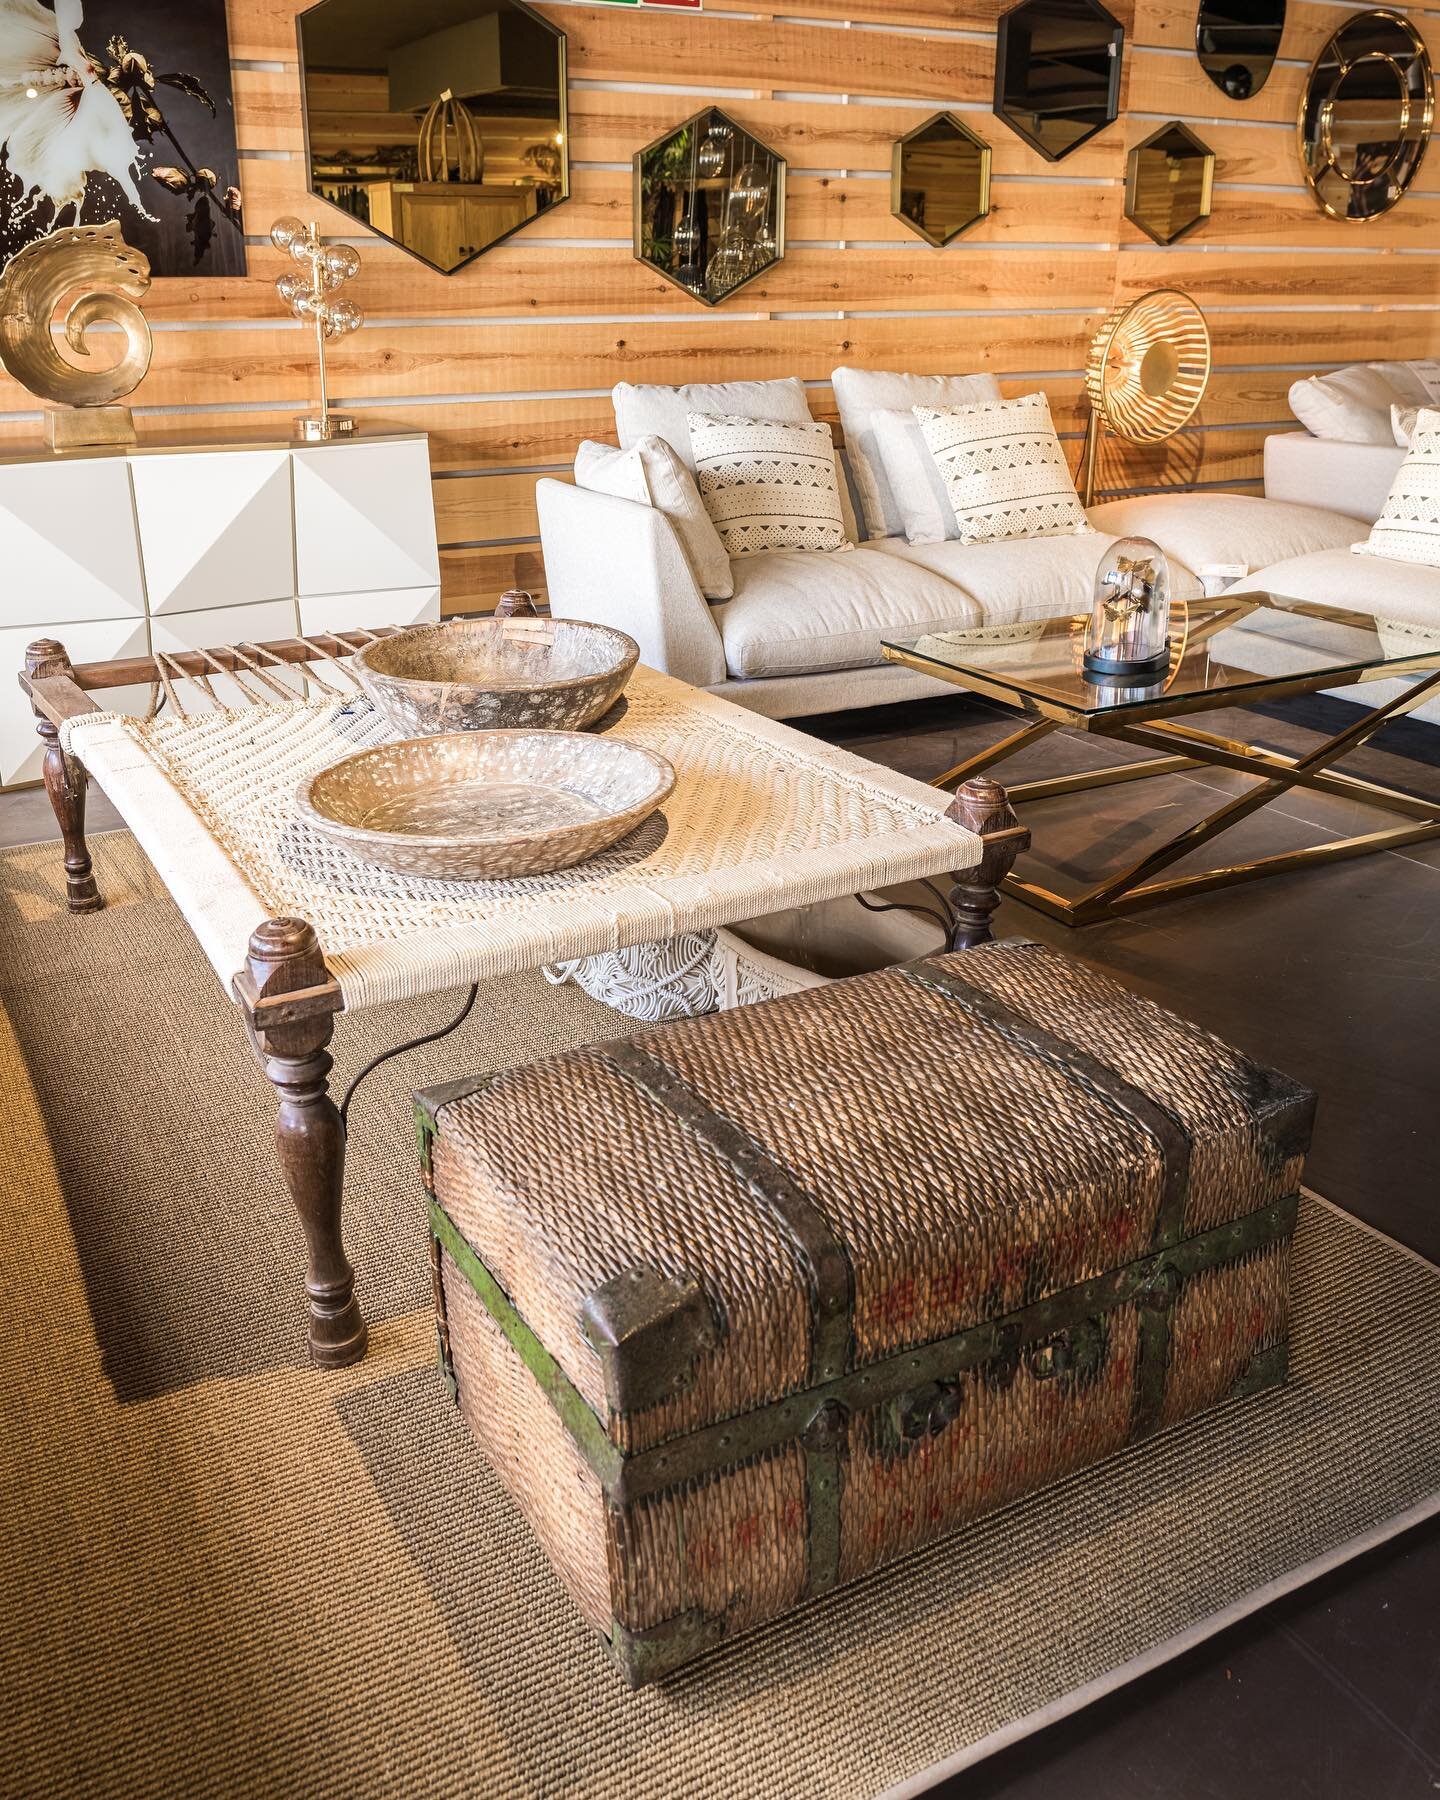 Experience the natural beauty at home with the perfect furniture from our new rustic style collection at @livingmoodibiza